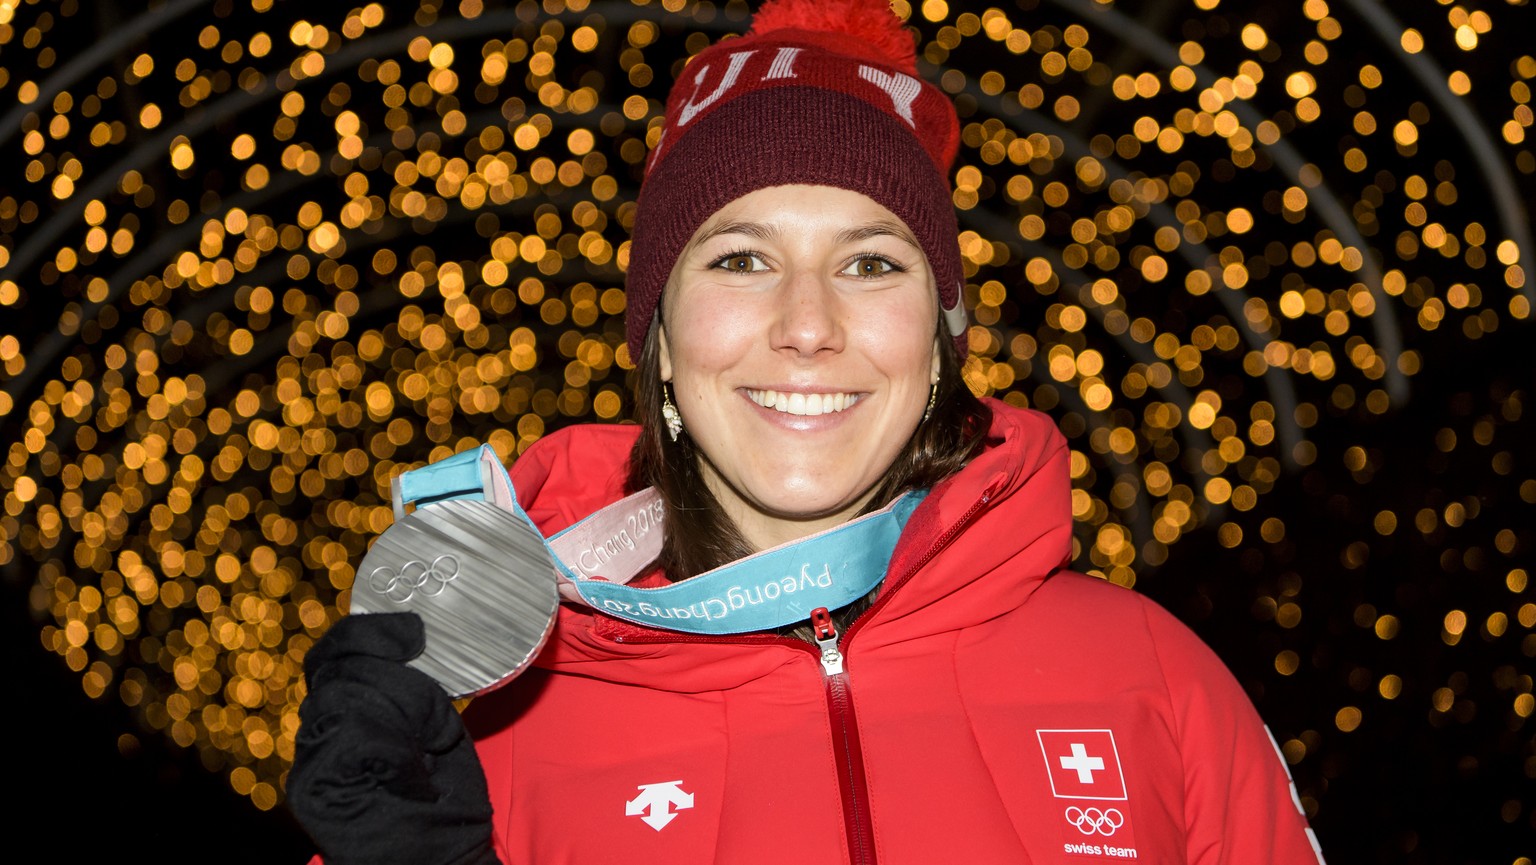 Silver medal, Wendy Holdener of Switzerland poses at the House of Switzerland after the women Alpine Skiing slalom race during the XXIII Winter Olympics 2018 in Pyeongchang, South Korea, on Friday, Fe ...